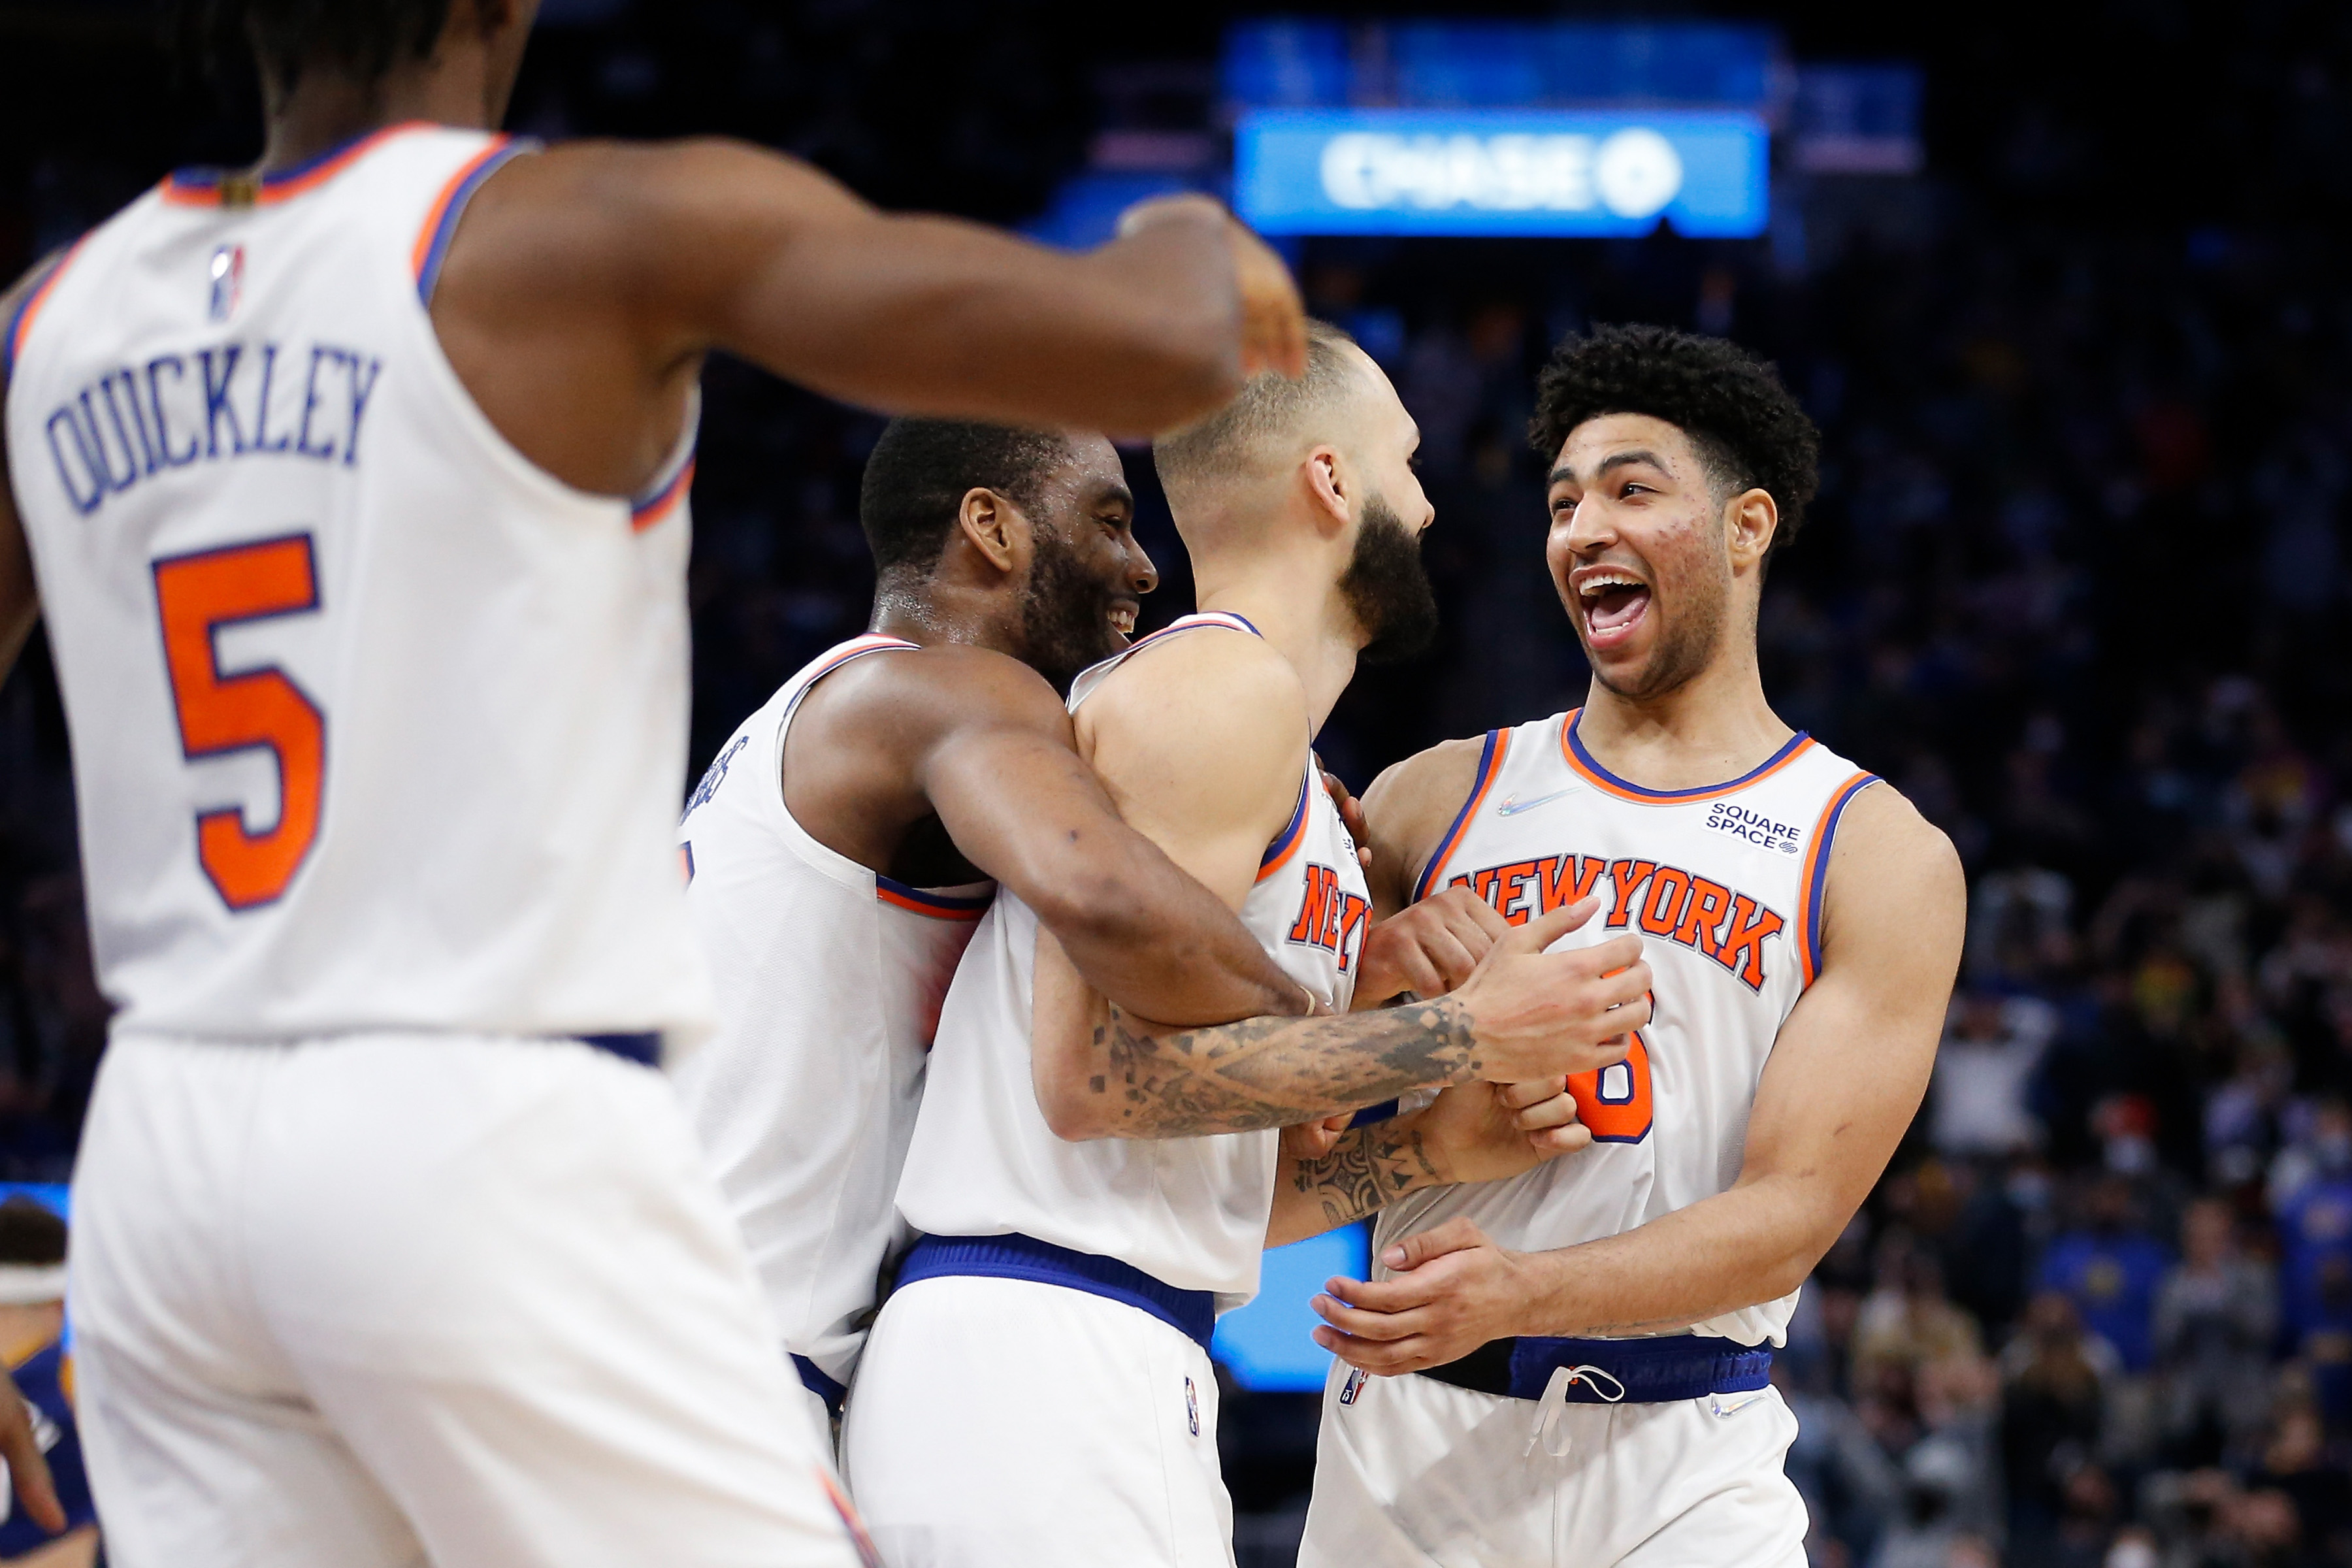 Quentin Grimes celebrates with New York Knicks teammates after a win over the Golden State Warriors in February 2022